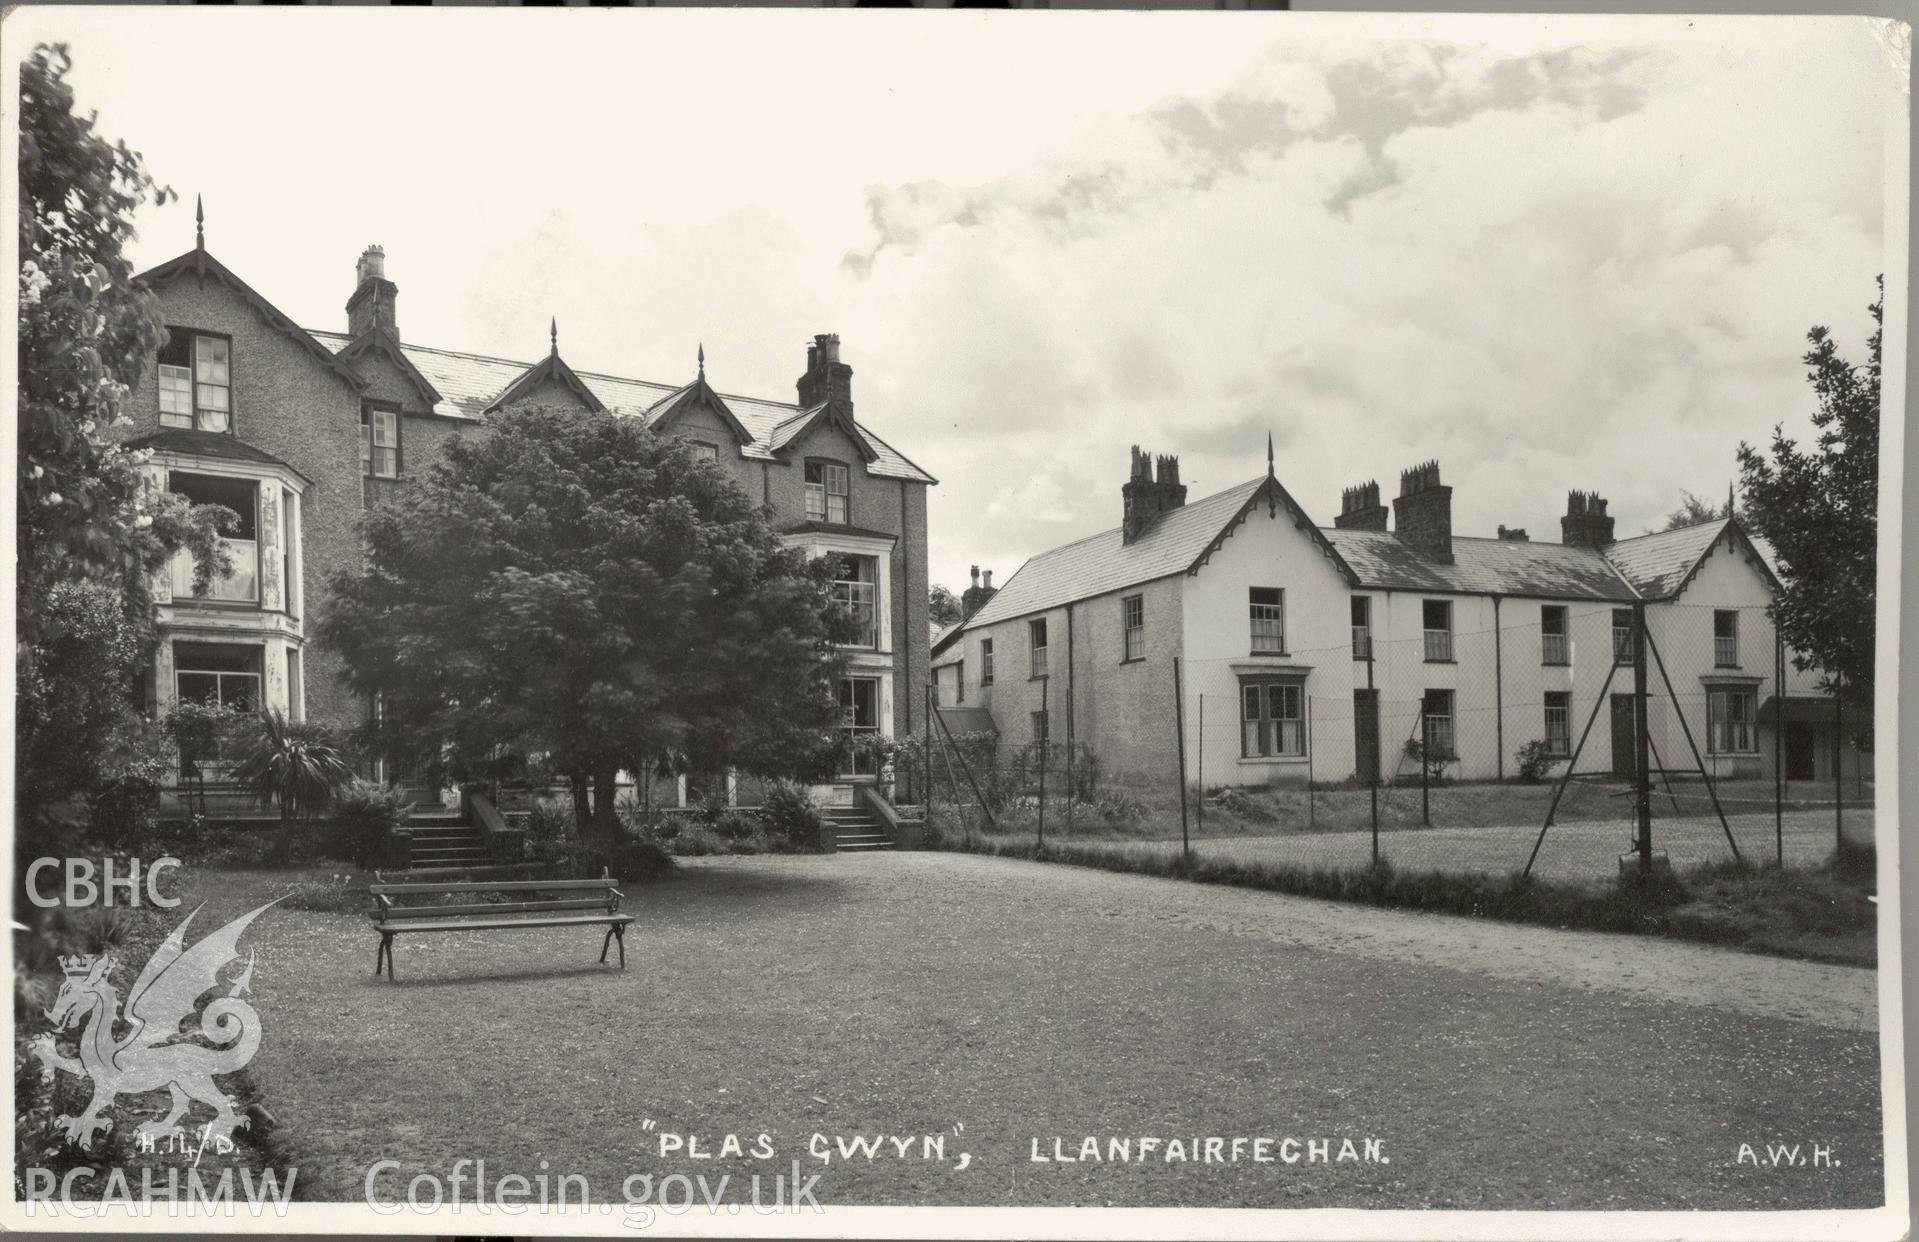 Digitised postcard image of Plas Gwyn, Llanfairfechan, A.W.H. Produced by Parks and Gardens Data Services, from an original item in the Peter Davis Collection at Parks and Gardens UK. We hold only web-resolution images of this collection, suitable for viewing on screen and for research purposes only. We do not hold the original images, or publication quality scans.